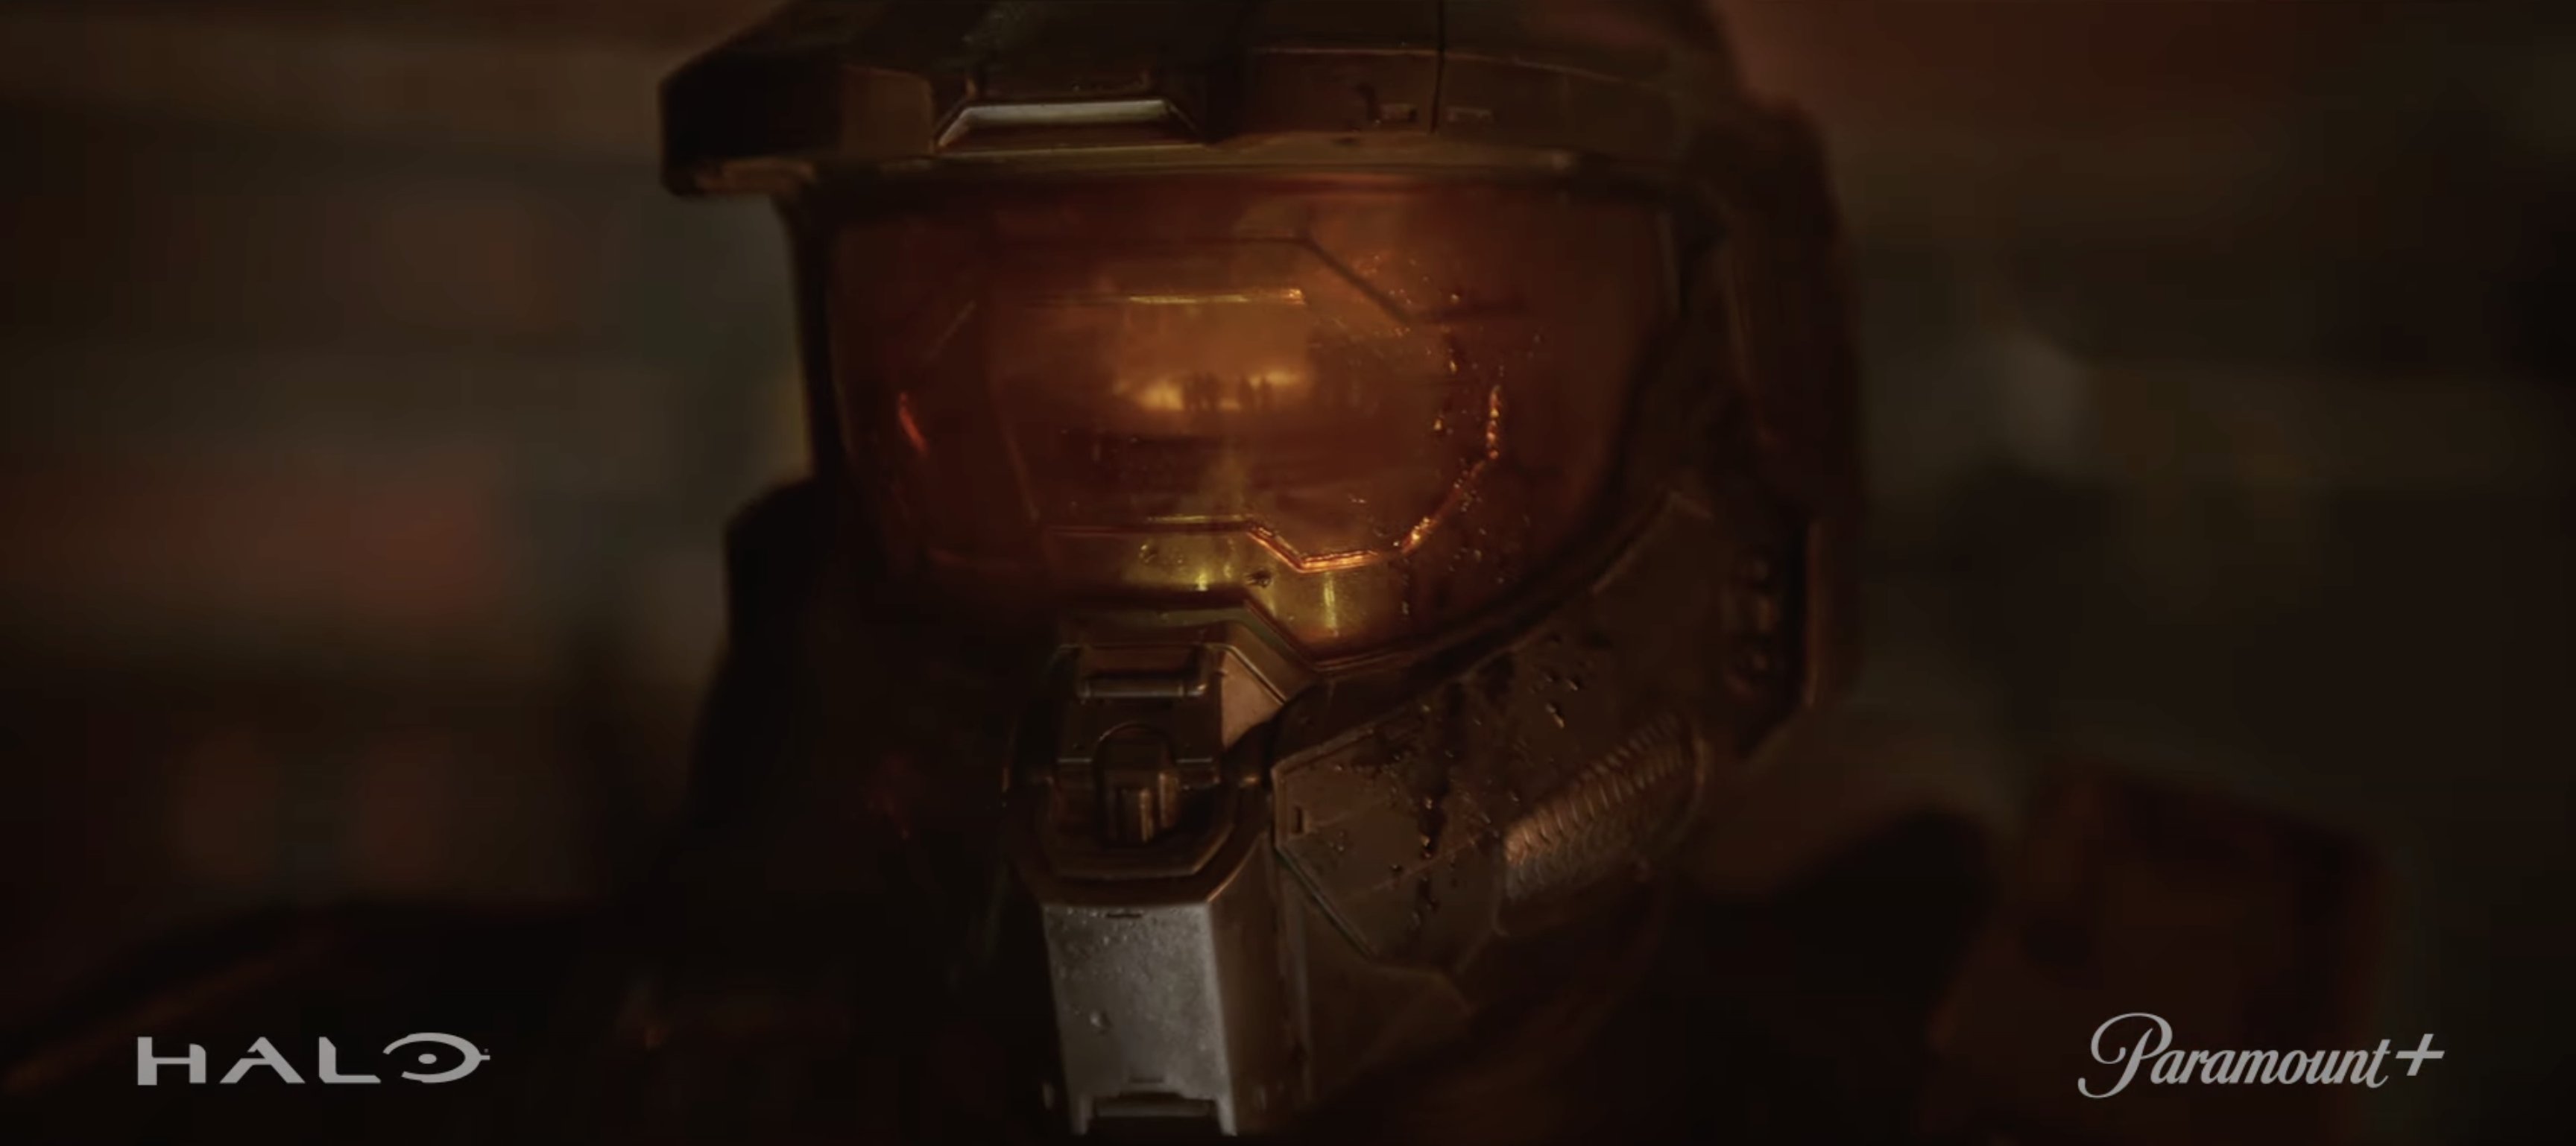 Watch The Trailer For Halo The Series